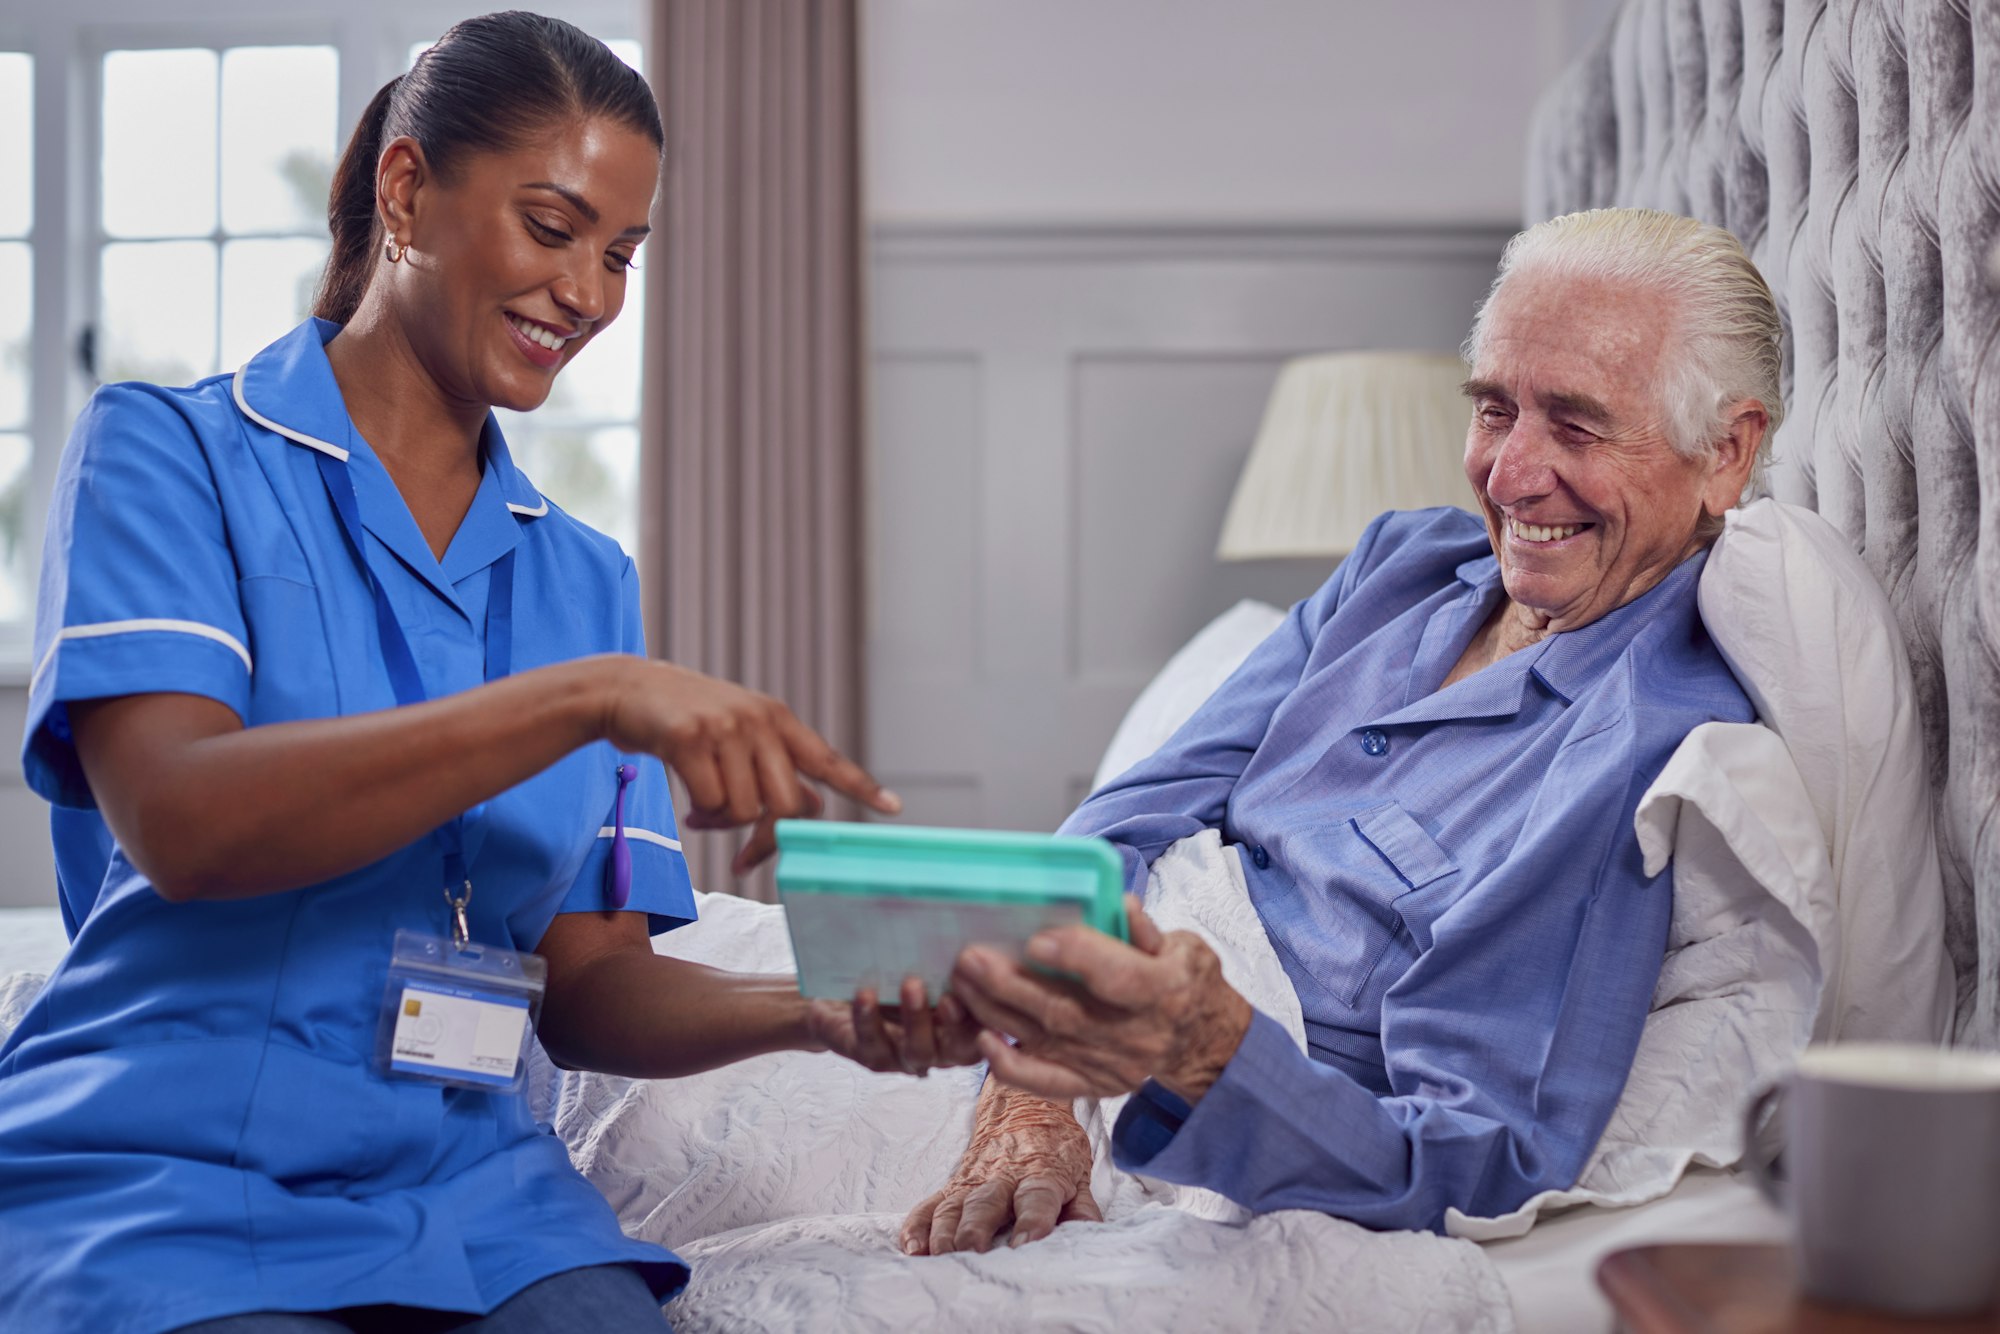 Female Care Worker In Uniform Helping Senior Man At Home In Bed With Medication